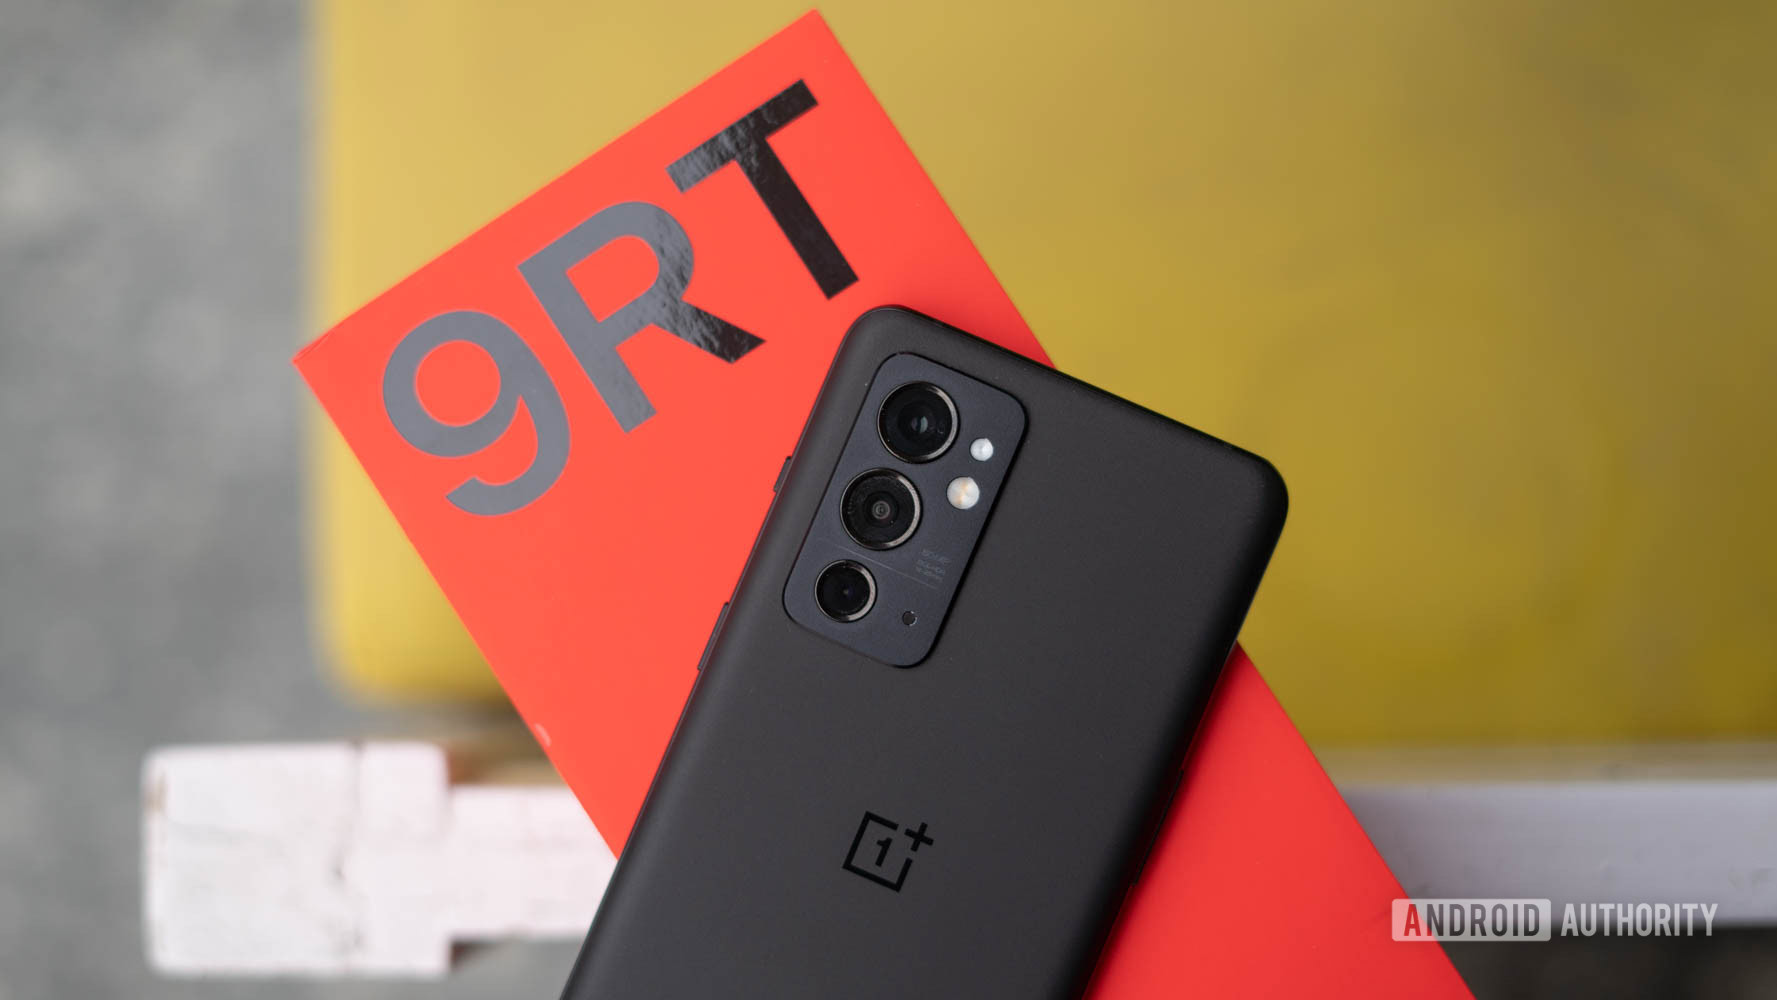 With The 11 Pro Dead, OnePlus Buyers Will Miss Out On This Key Feature